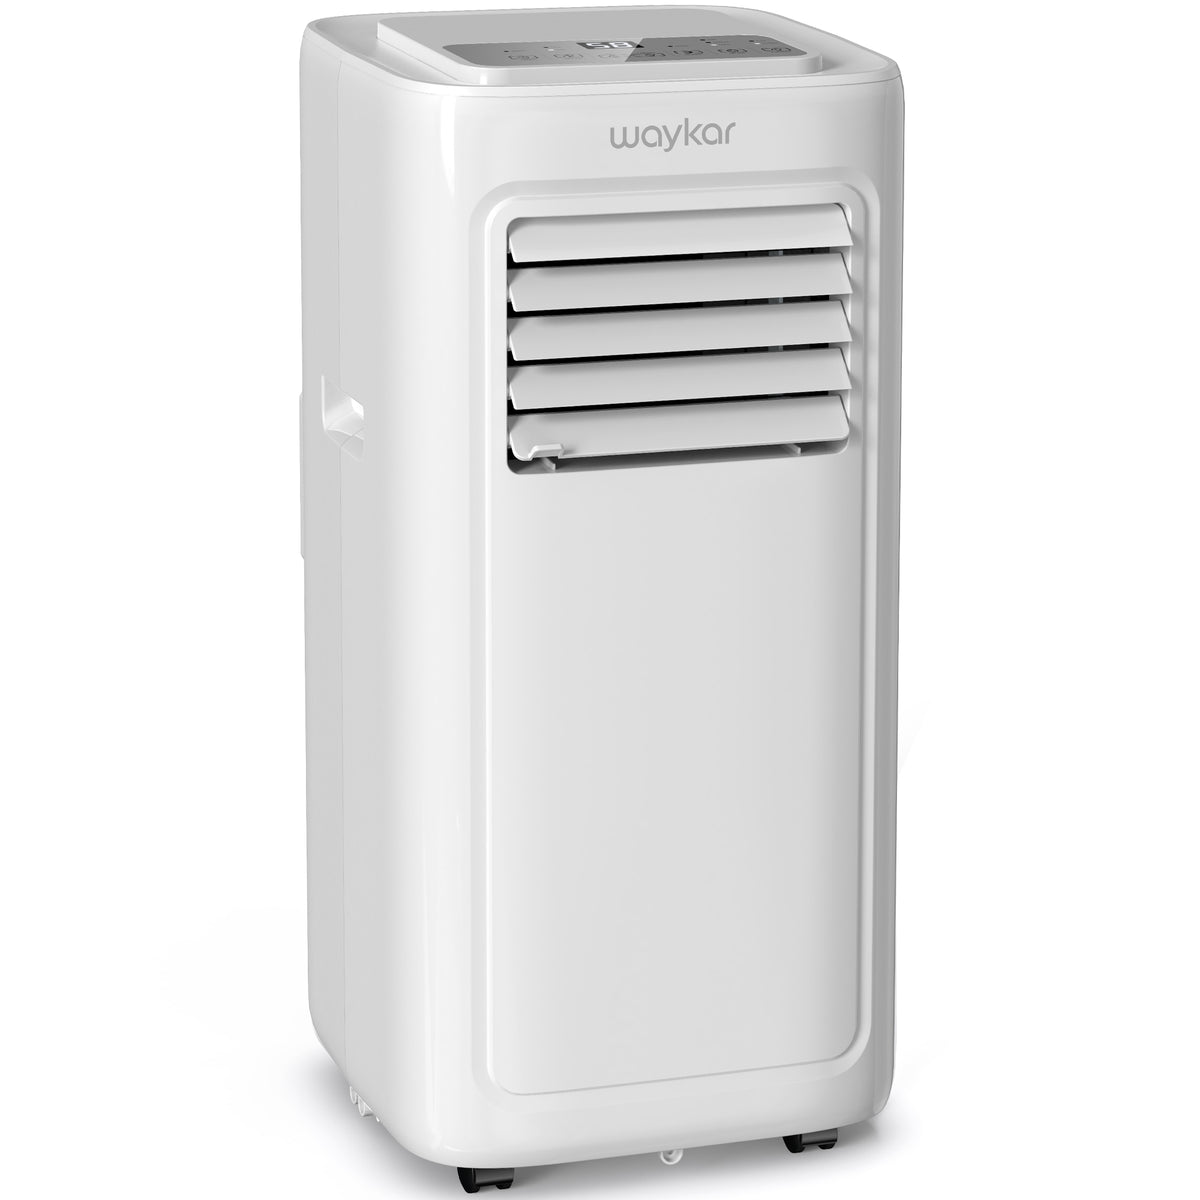 Waykar 9,000 BTU Portable Air Conditioner Up to 450 Sq. Ft with Dehumidifier and Fan Mode, 3-in-1 Room Air Conditioner with Drain Hose, 24-Hr Timer, Installation Kit for Home Office